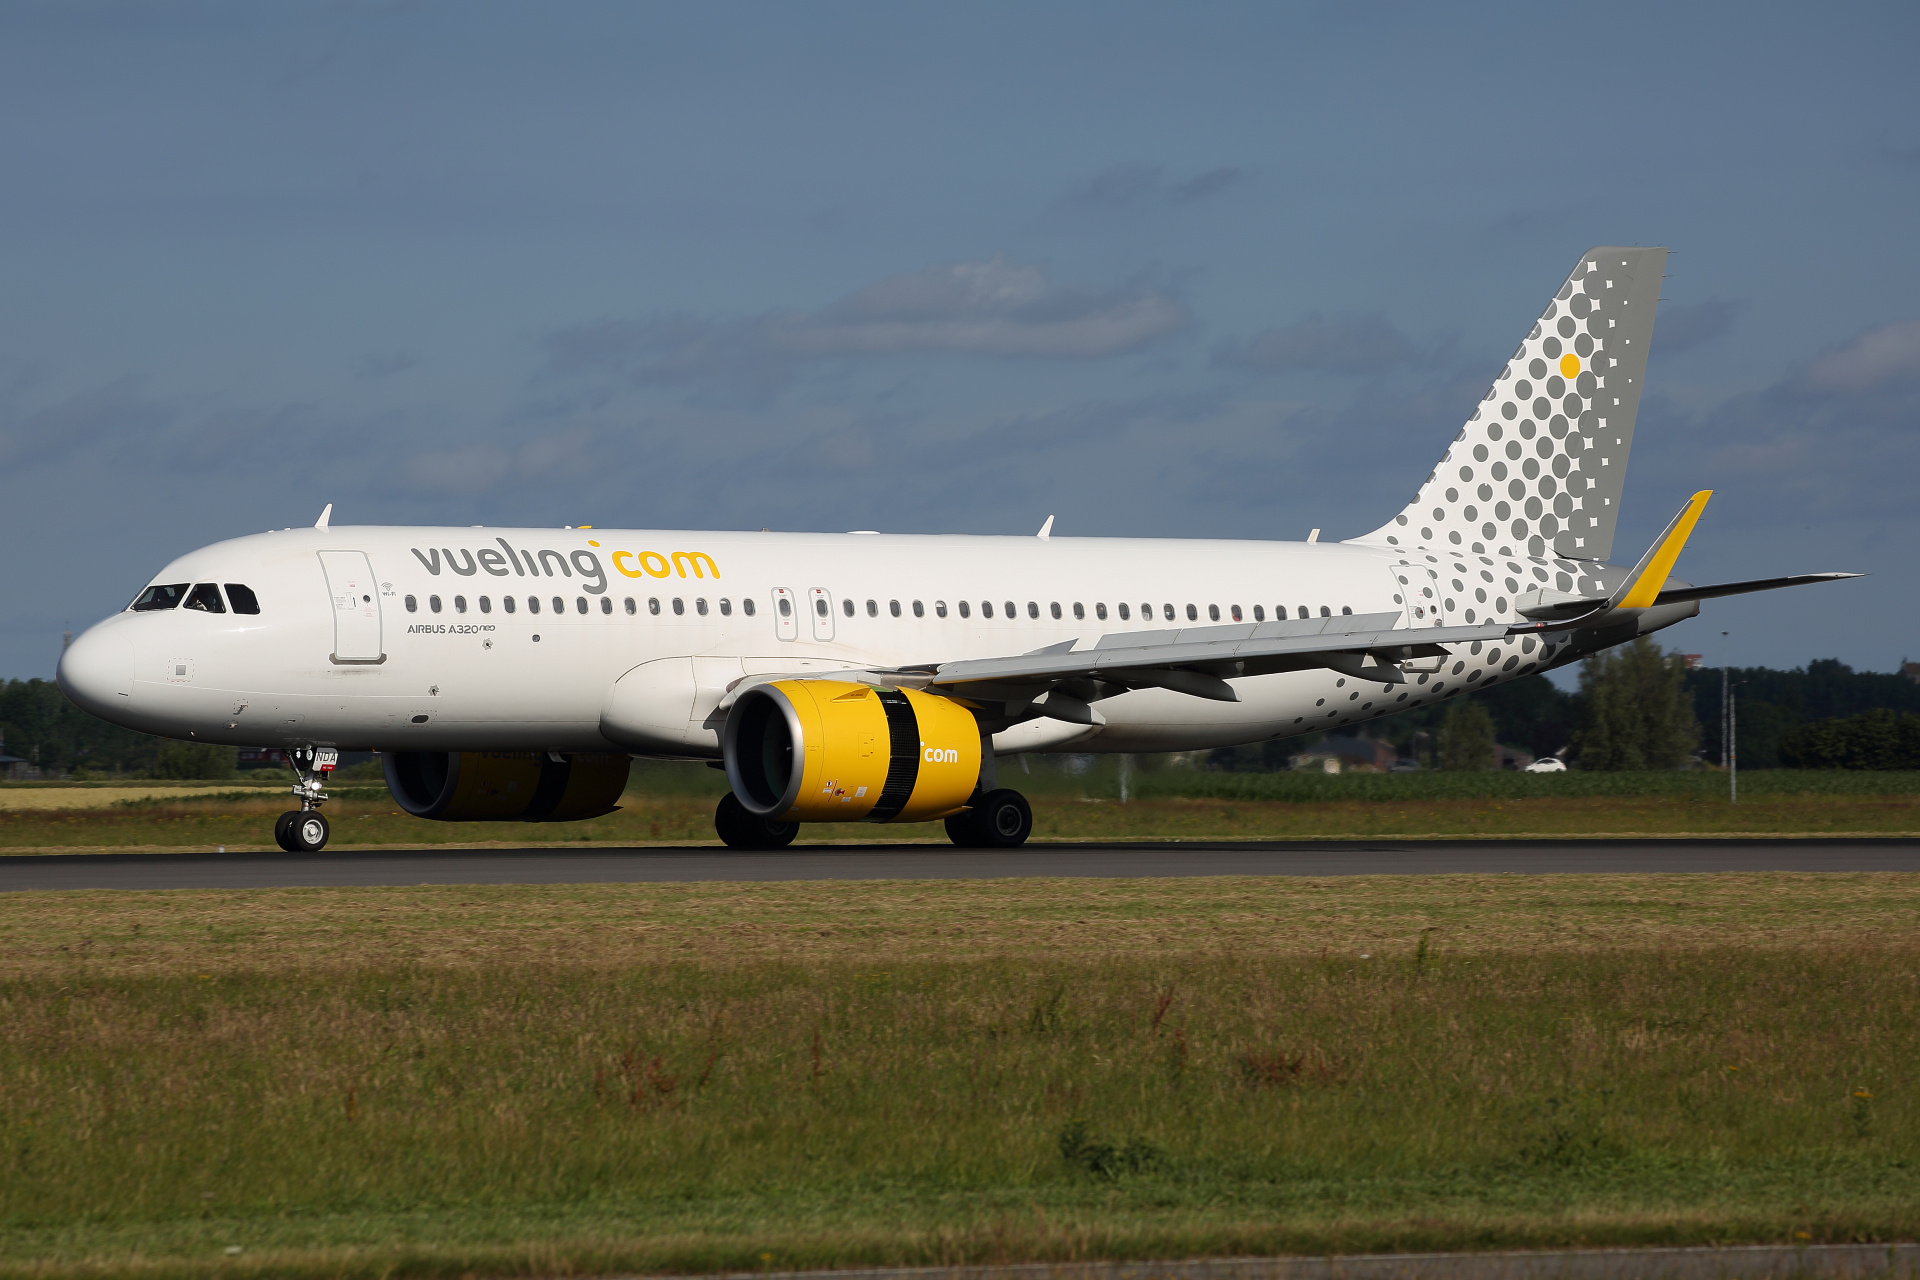 EC-NDA (Aircraft » Schiphol Spotting » Airbus A320neo » Vueling Airlines)